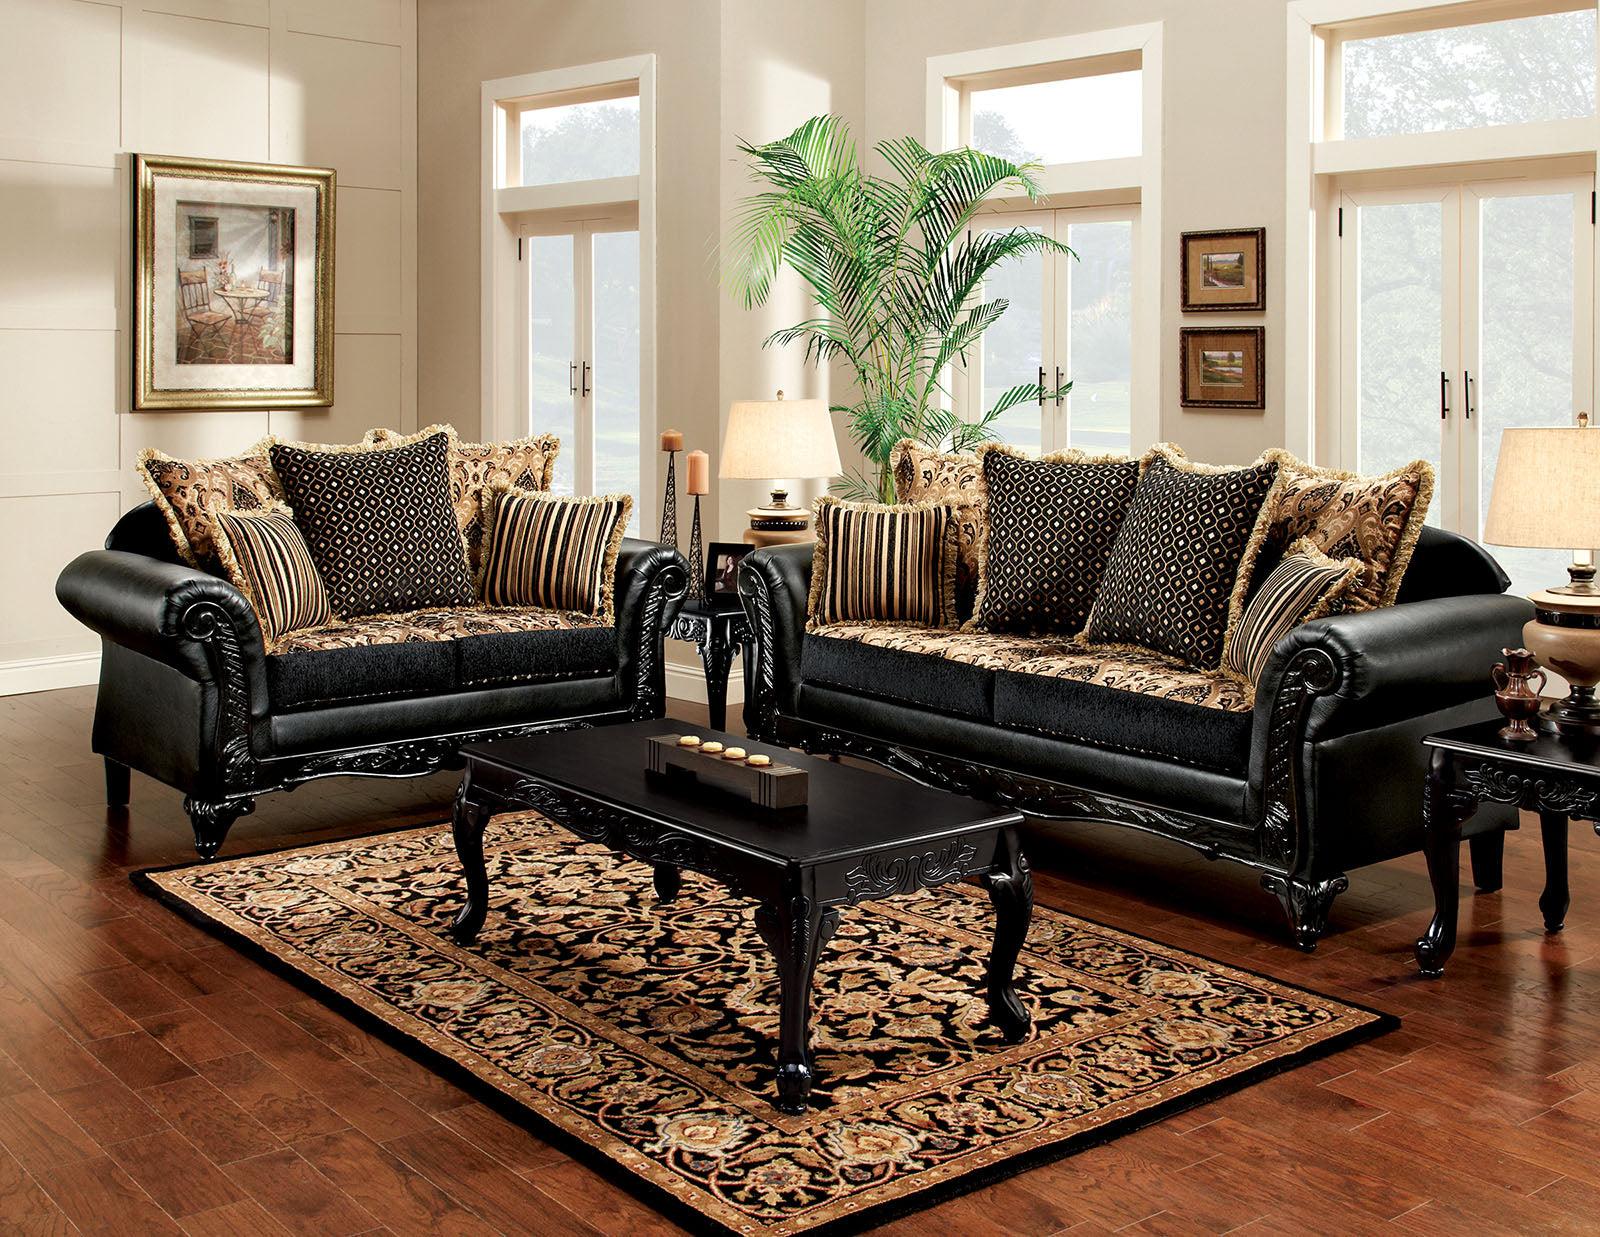 Traditional Sofa Loveseat and Coffee Table Set SM7505N-5PC Theodora & Cheshire SM7505N-5PC in Tan, Black Chenille